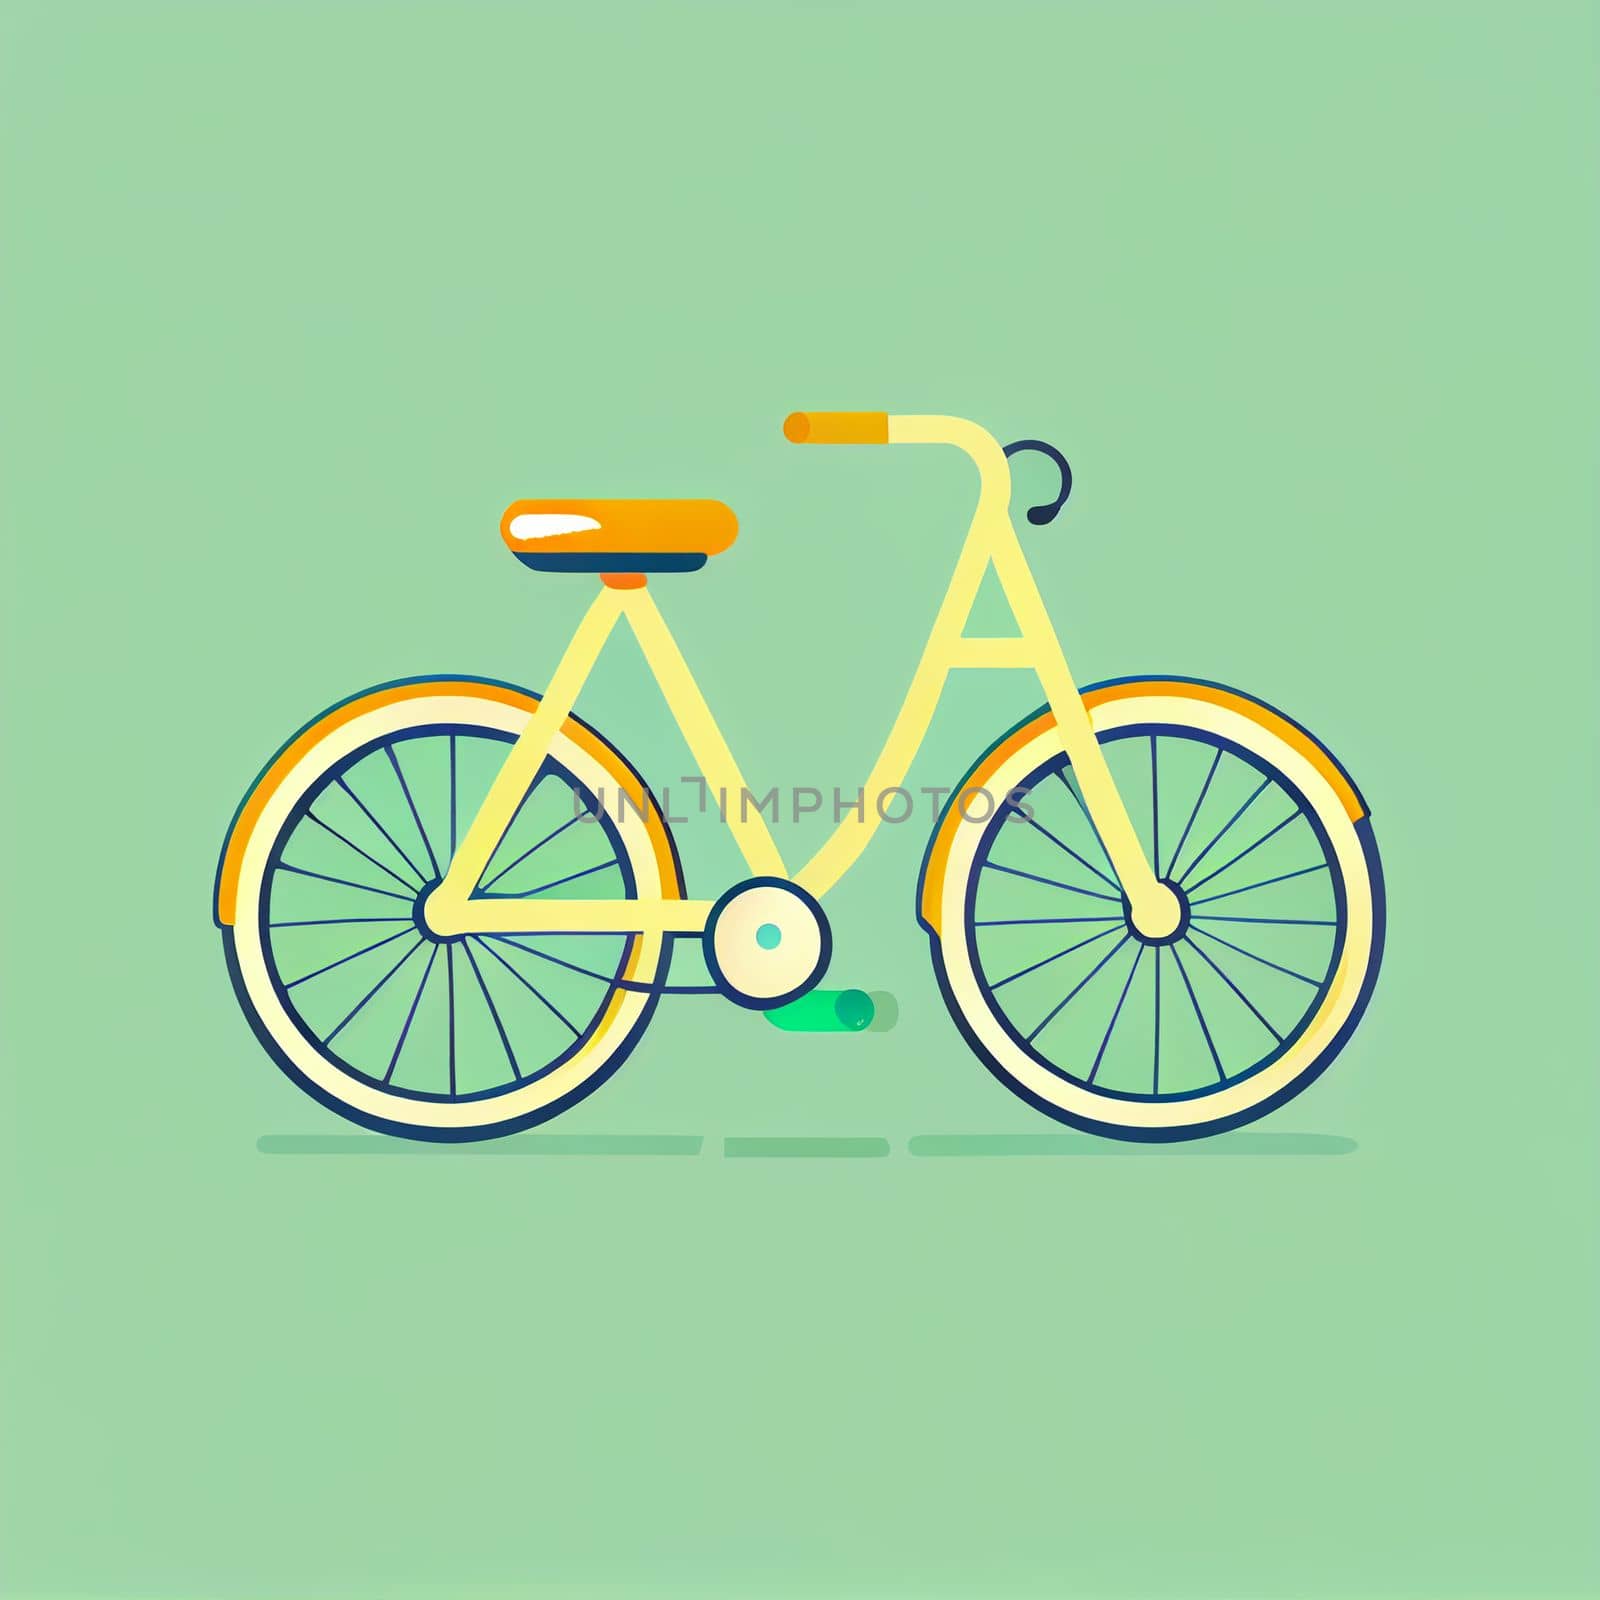 Modern flat design of Transport public transportable bicycle for transportation in city. by FokasuArt